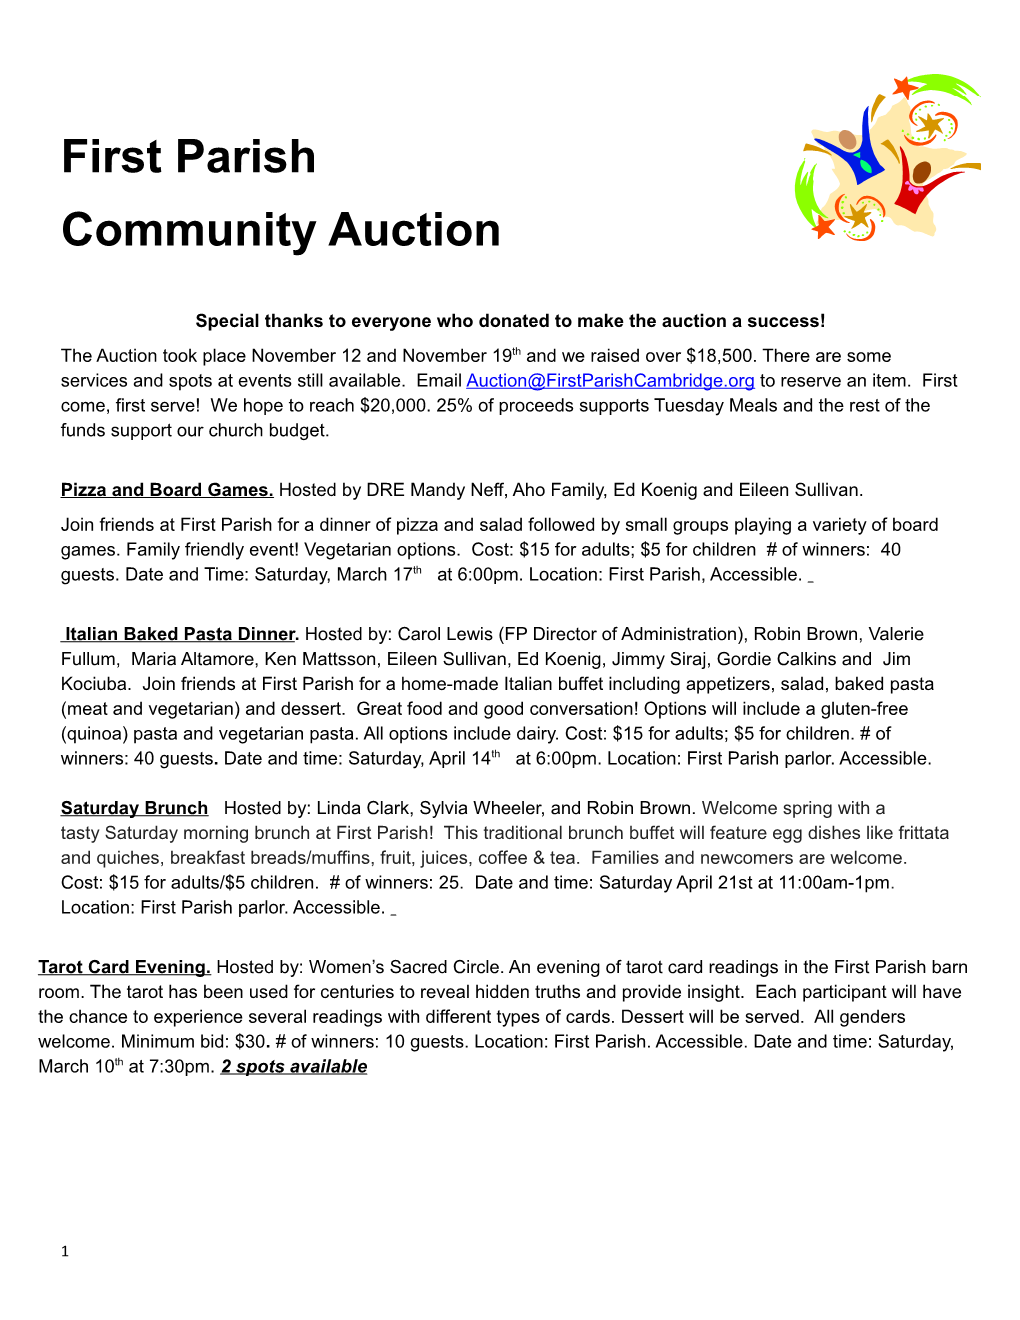 Special Thanks to Everyone Who Donated to Make the Auction a Success!